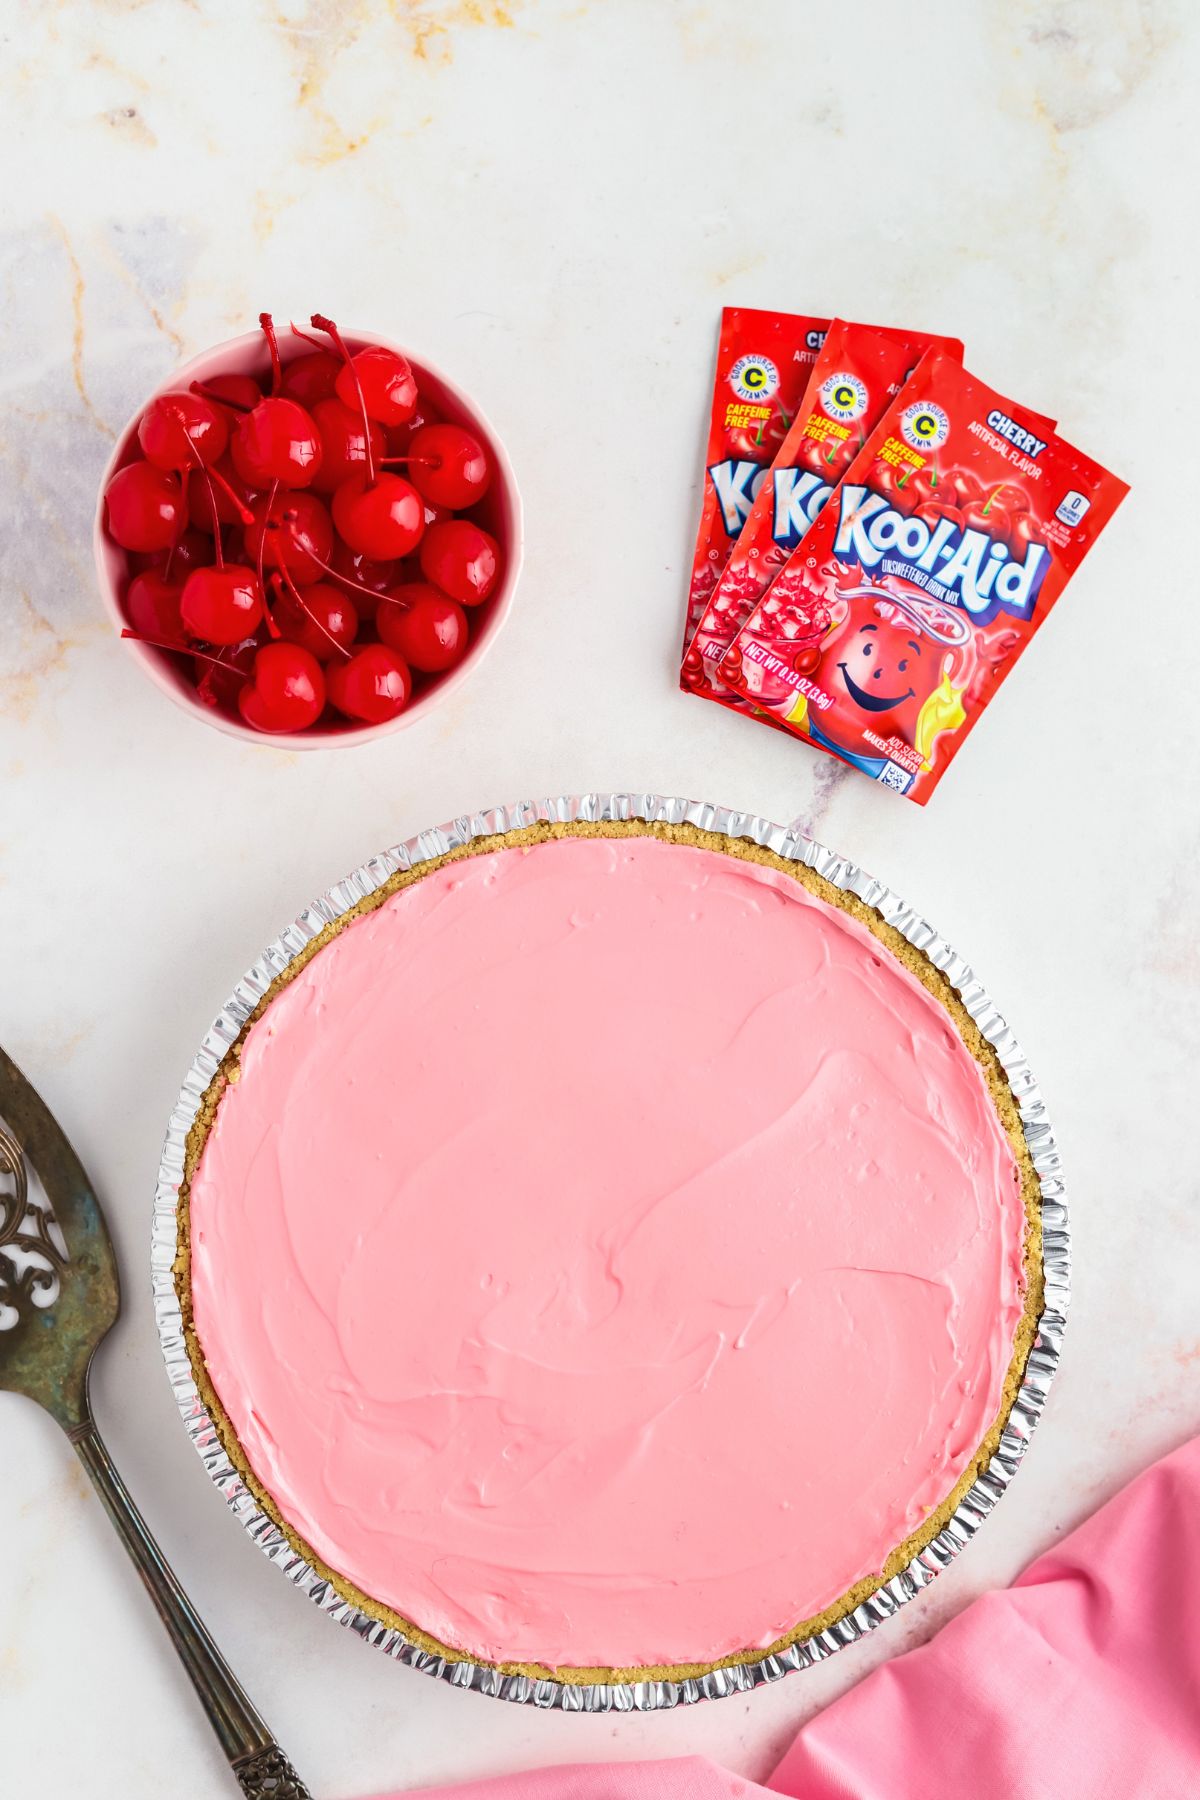 Cherry Kool-Aid Pie poured into a pie crust and then chilled.